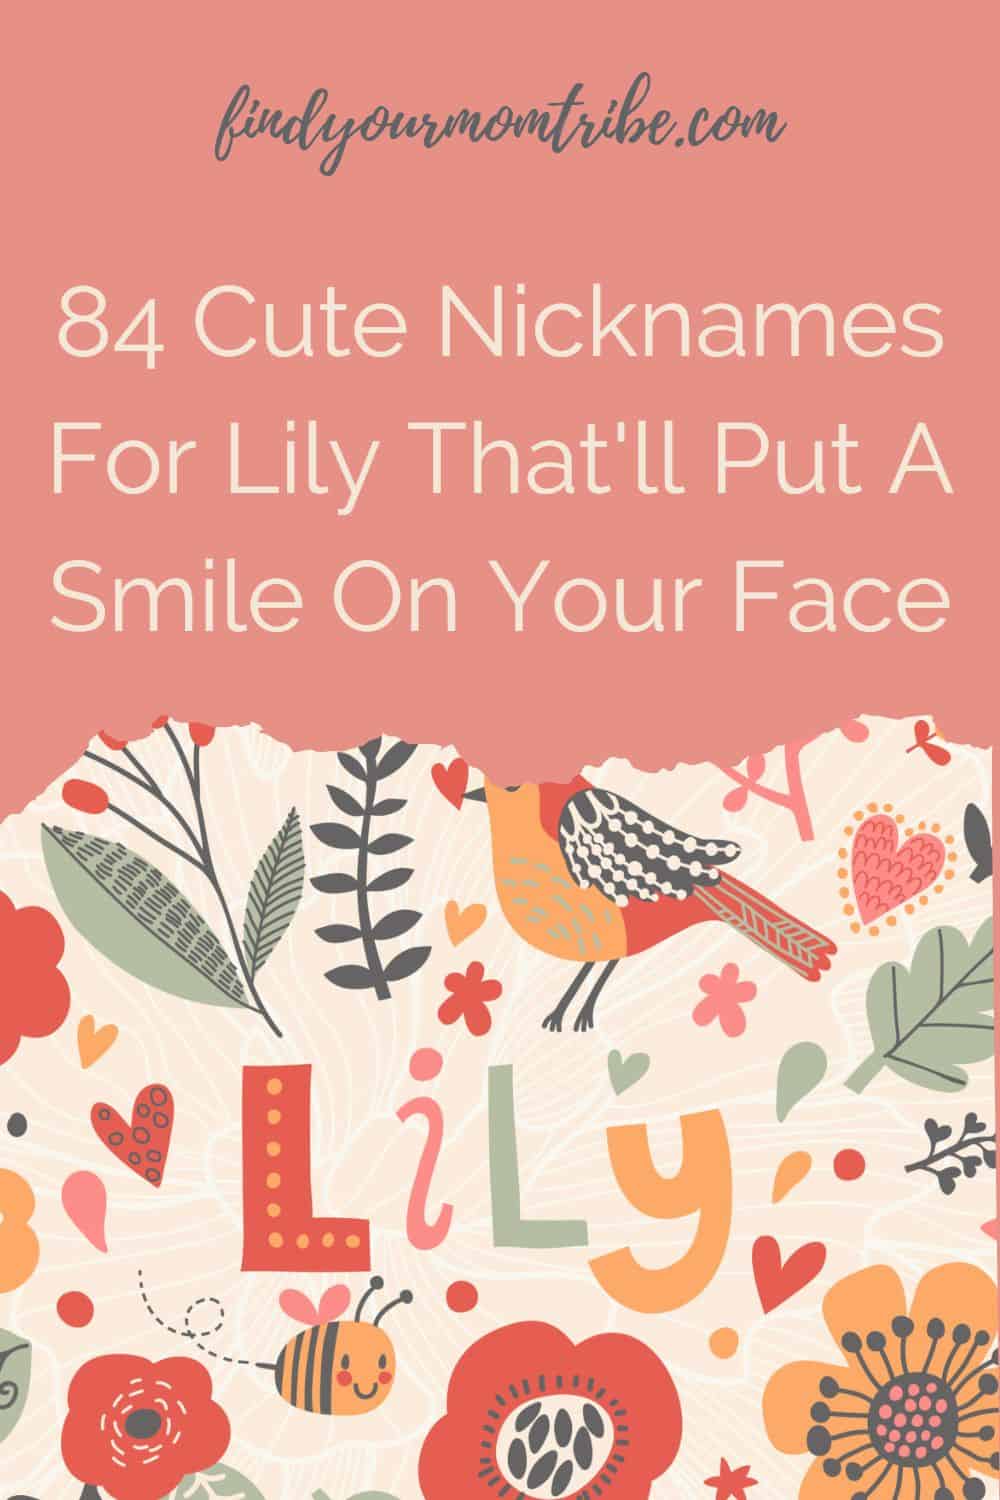 Pinterest nicknames for lily